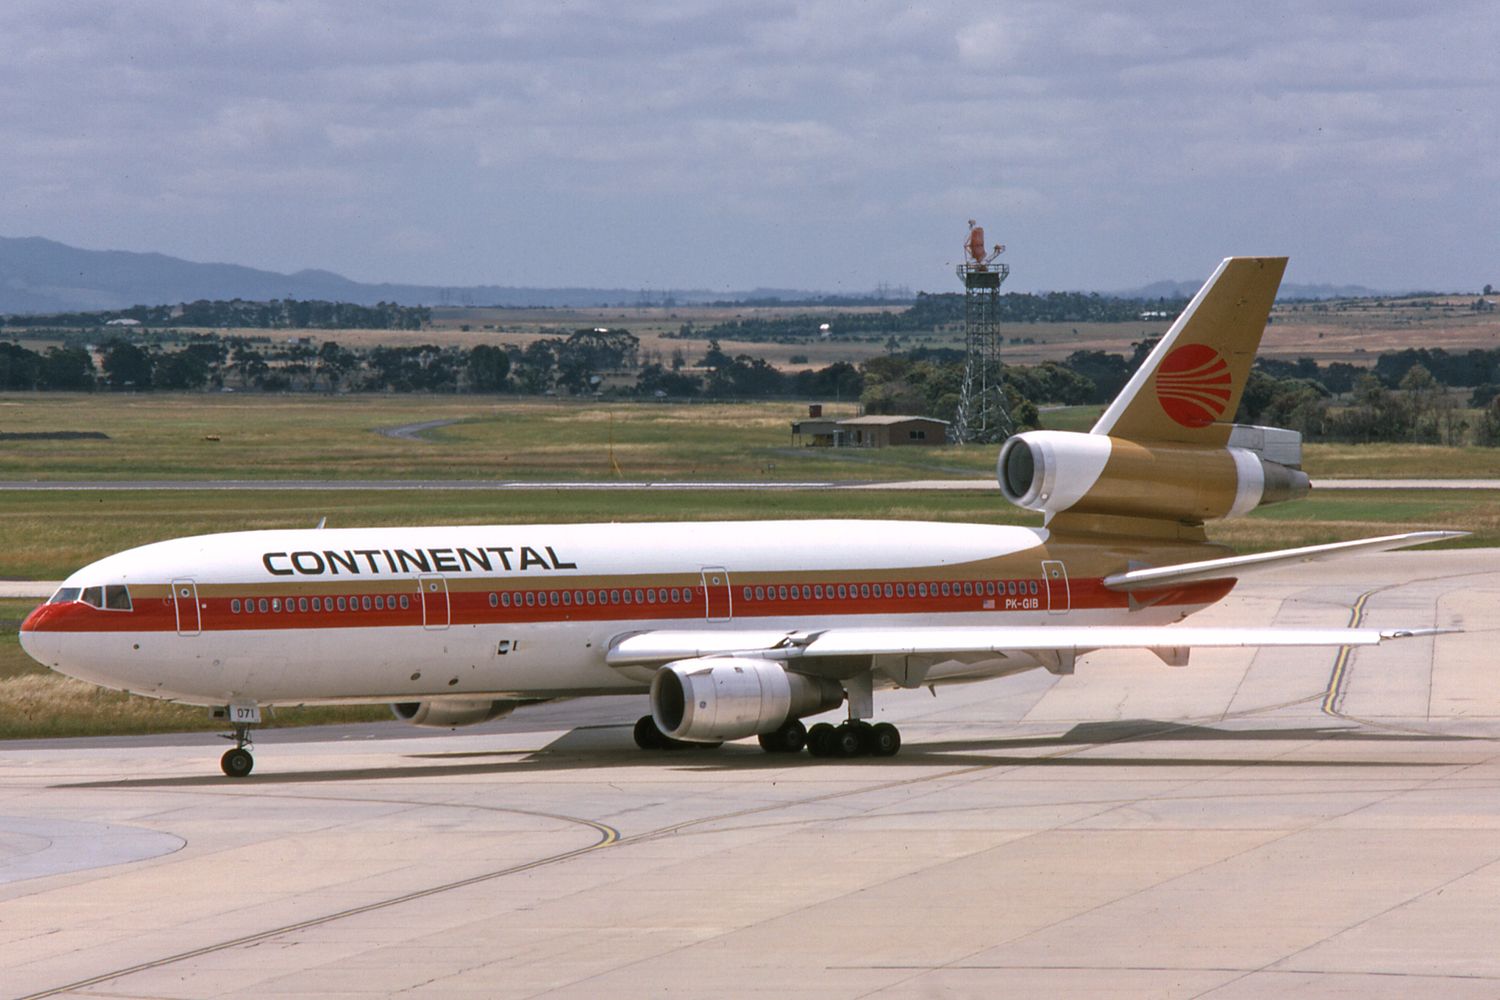 McDonnell Douglas DC-10 (PK-GIB) - This was taken December 26 1985 and was a Garuda Indonesian aircraft leased to Continental from November 1985 to June 1987.